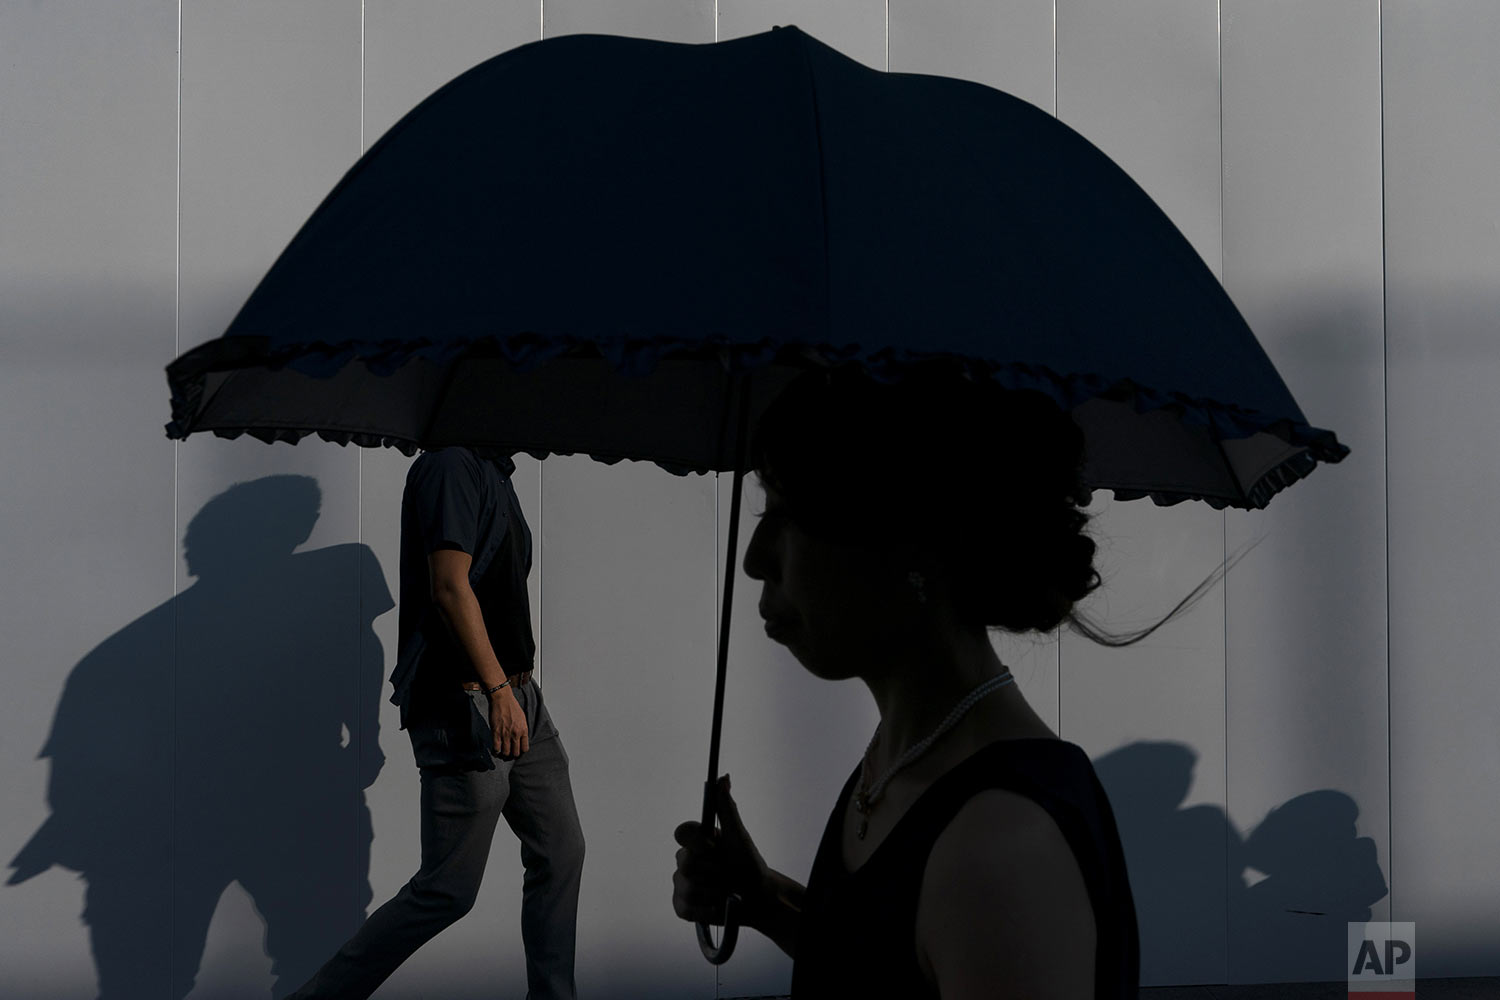  Pedestrians cast their shadows as they walk along a sidewalk Sunday, Aug. 11, 2019, in Tokyo's Roppongi district of Tokyo. (AP Photo/Jae C. Hong) 